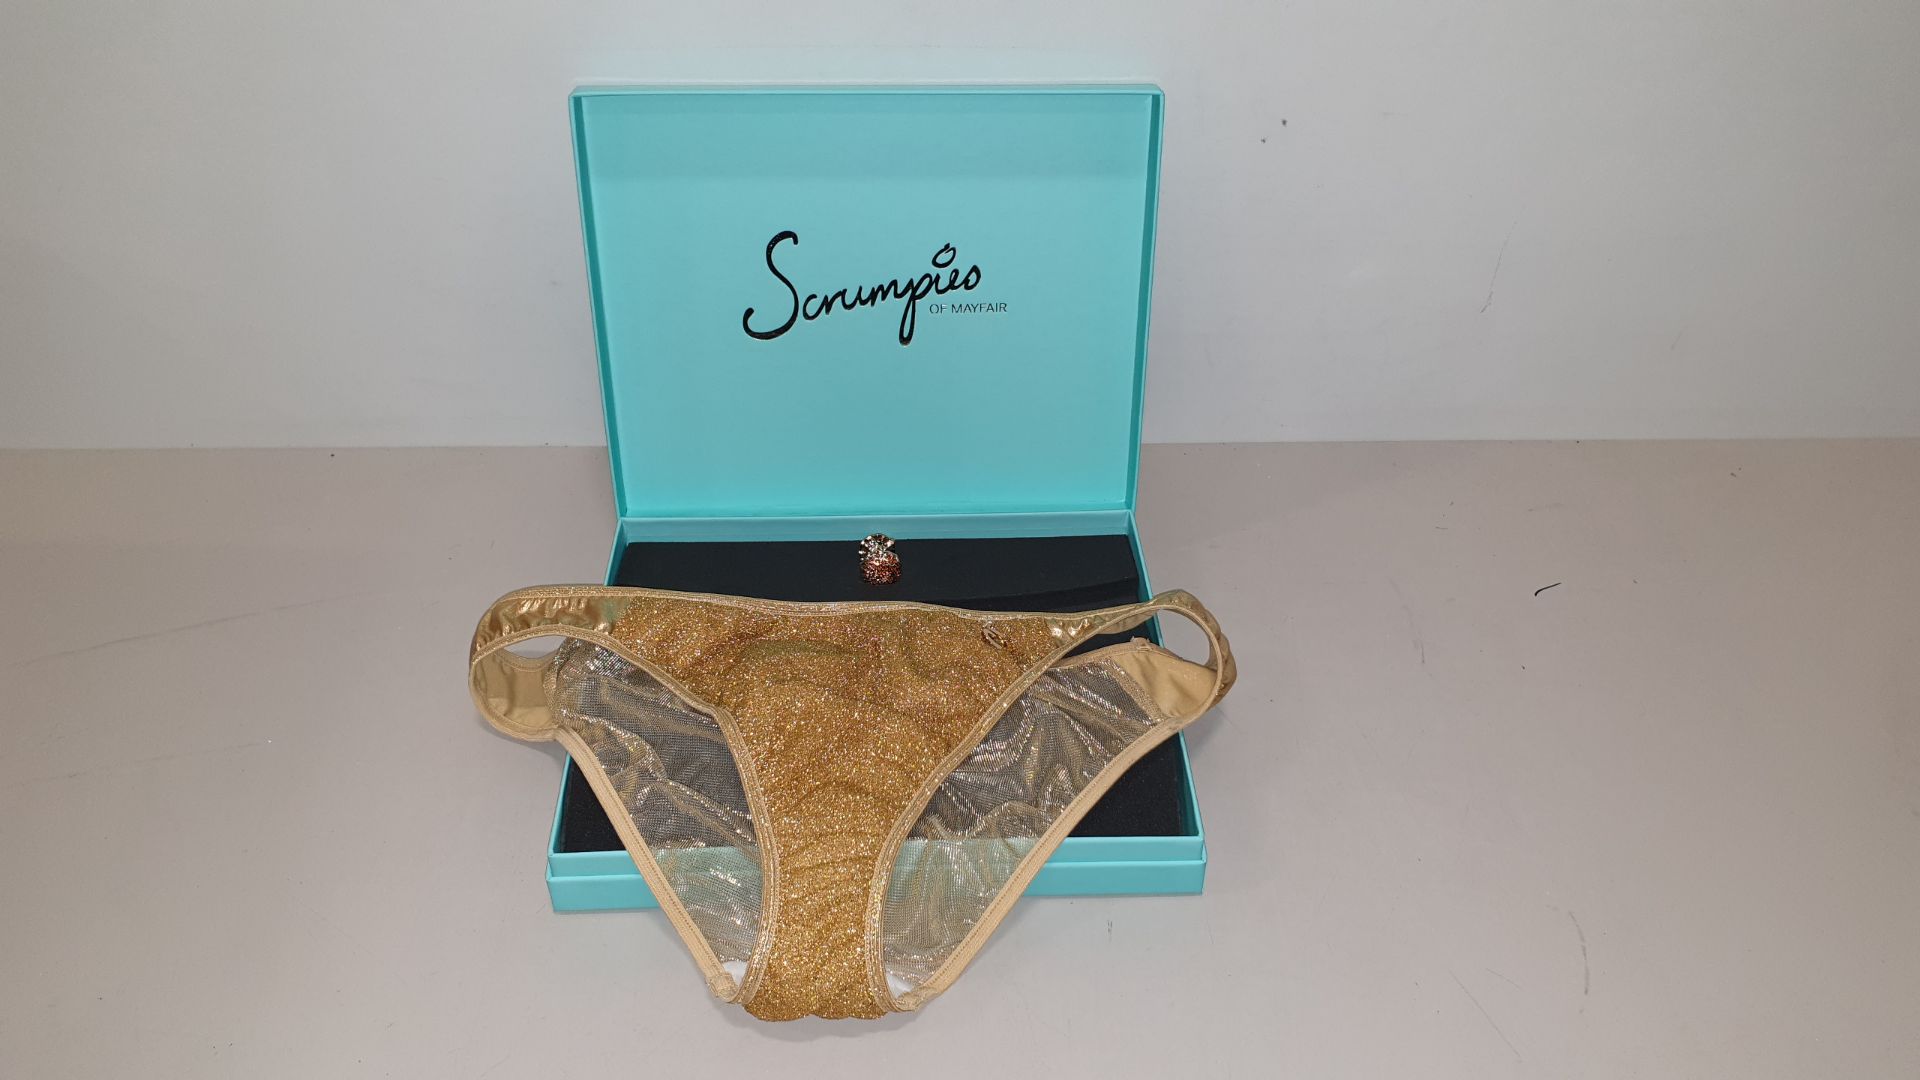 50 X SCRUMPIES OF MAYFAIR GOLDEN DELICIOUS TANGA BRIEFS - SIZES 8-16 (1-5) WITH BAG OF 50 CHARMS AND